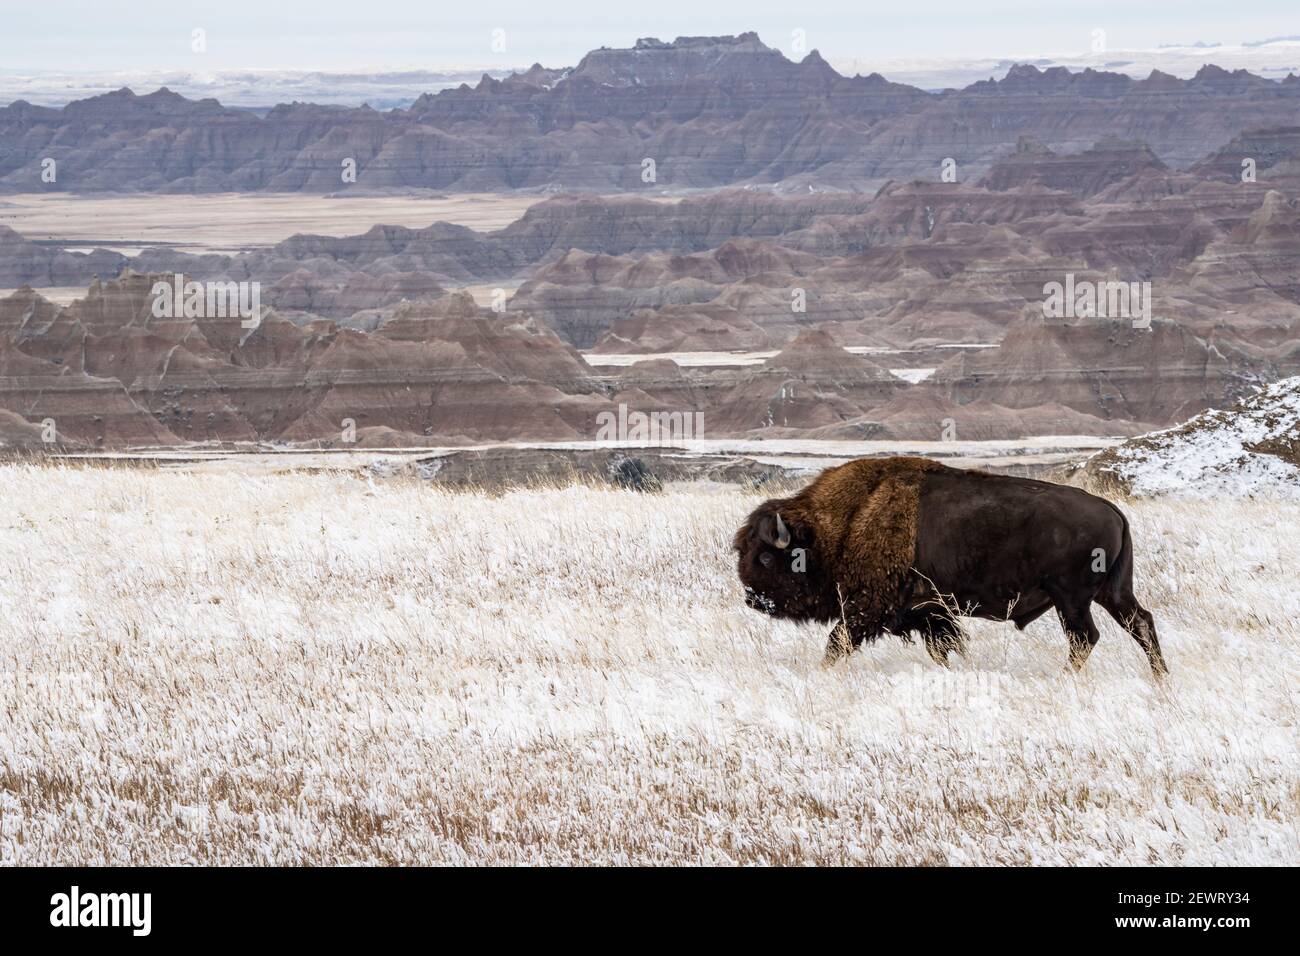 American Bison (Bison Bison) walking in the snow in the Badlands, Badlands National Park, South Dakota, United States of America, North America Stock Photo